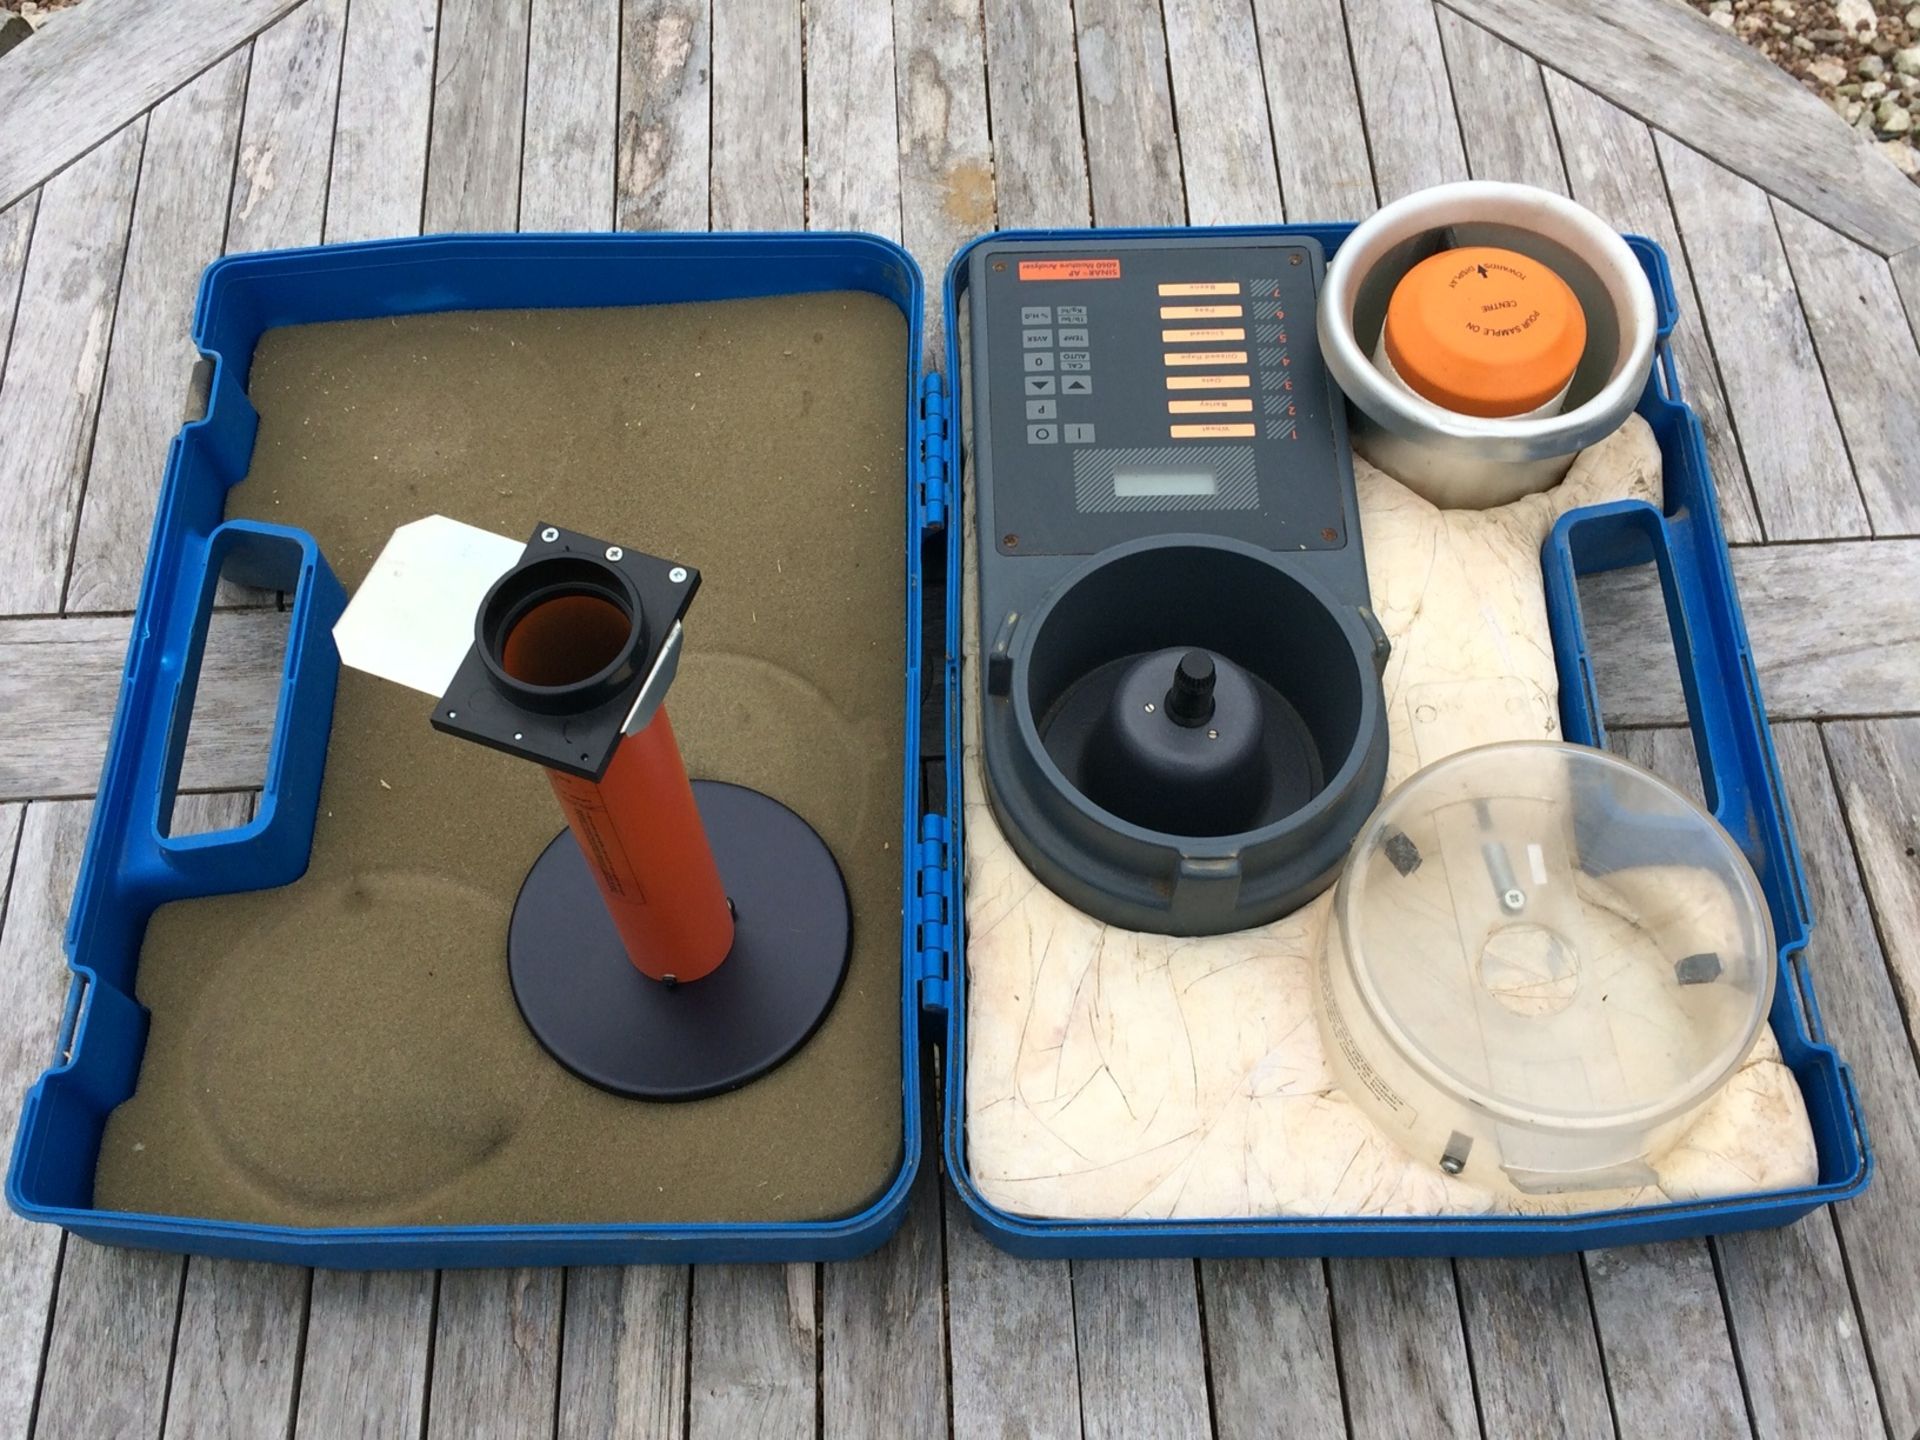 Sinar AP 6060 Moisture analyser plus bushel weight kit, with carrying case. Location: Bude, Cornwall